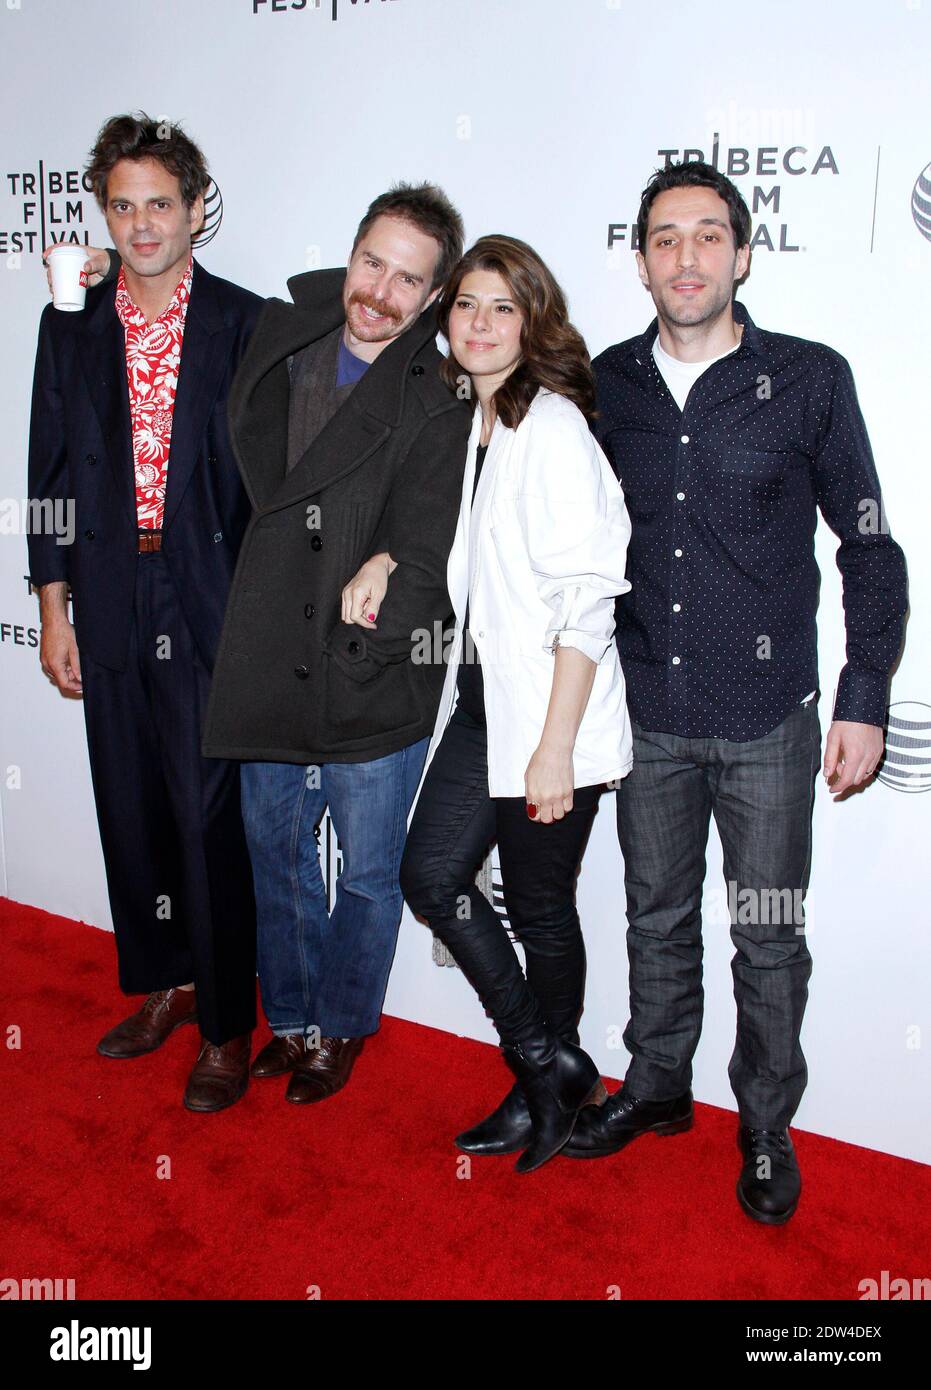 Ivan Martin, Sam Rockwell, Marisa Tomei and Michael Godere attend the 'Loitering With Intent' Tribeca Film Festival premiere at the SVA Theater in New York City, NY, USA, on April 18, 2014. Photo by Donna Ward/ABACAPRESS.COM Stock Photo